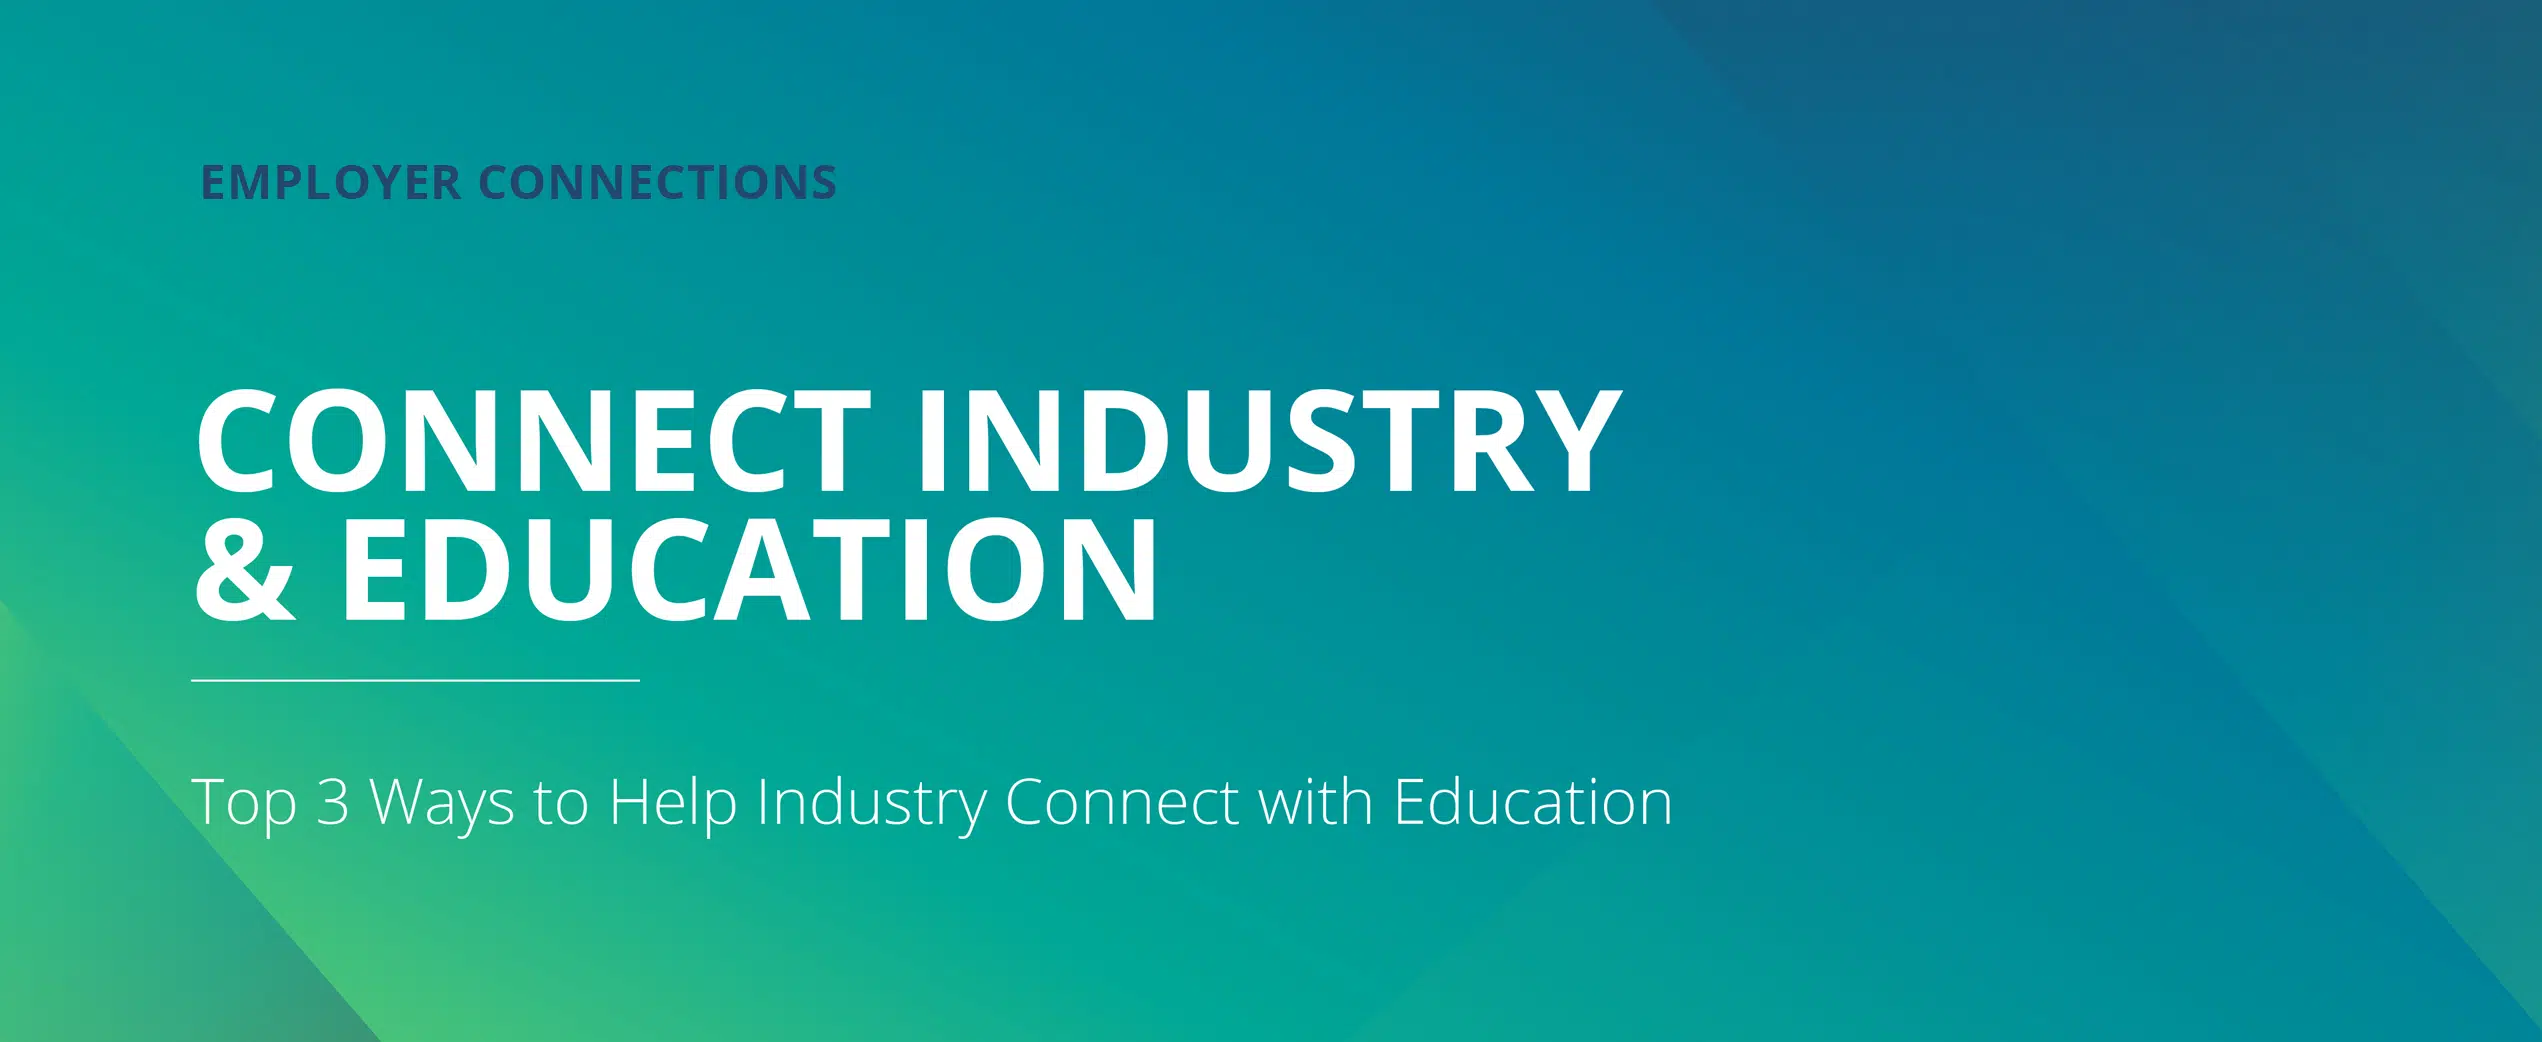 Top 3 Ways to Help Industry Connect with Education